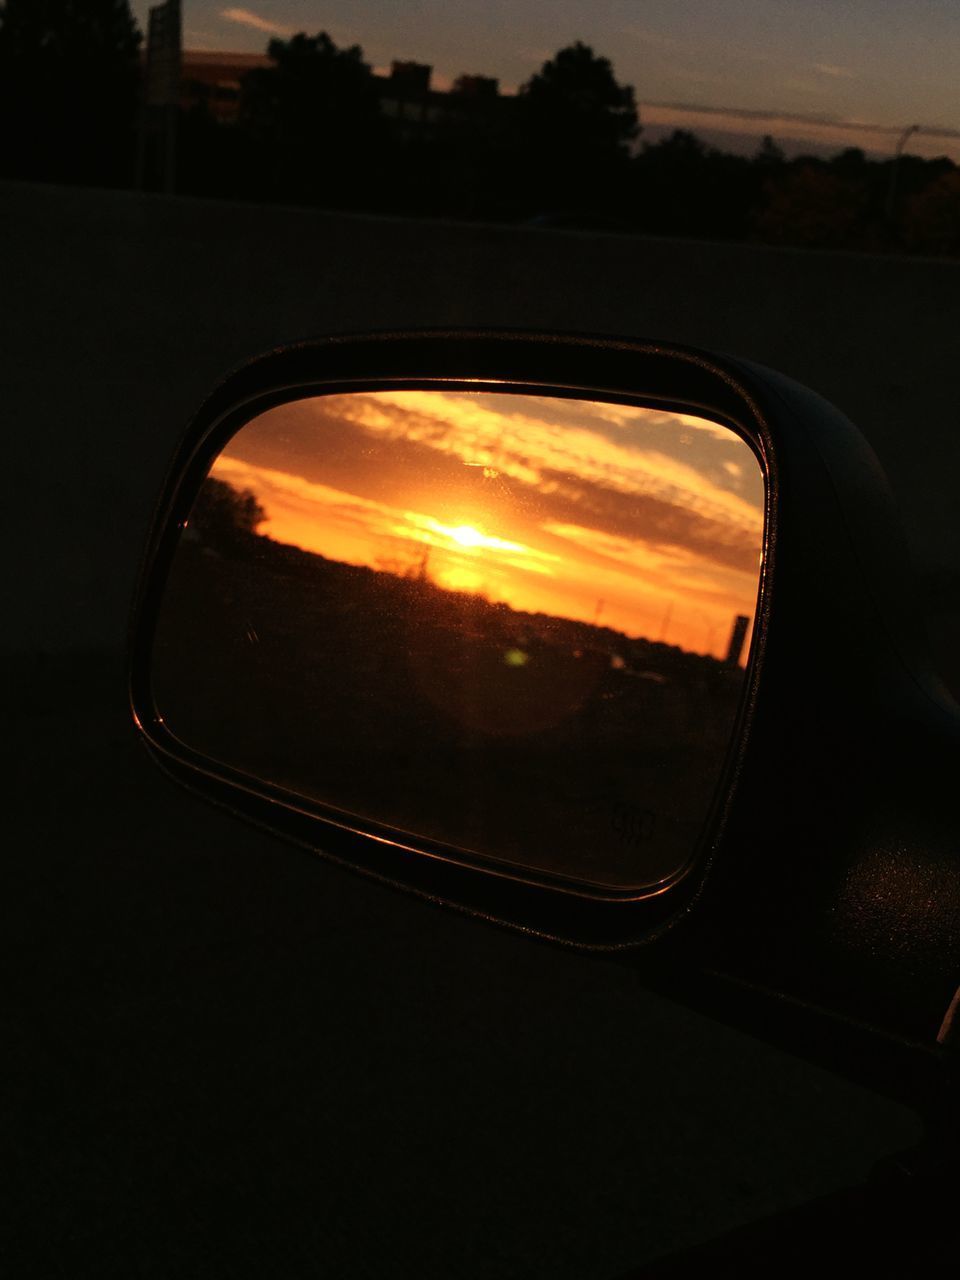 REFLECTION OF SKY ON SIDE-VIEW MIRROR